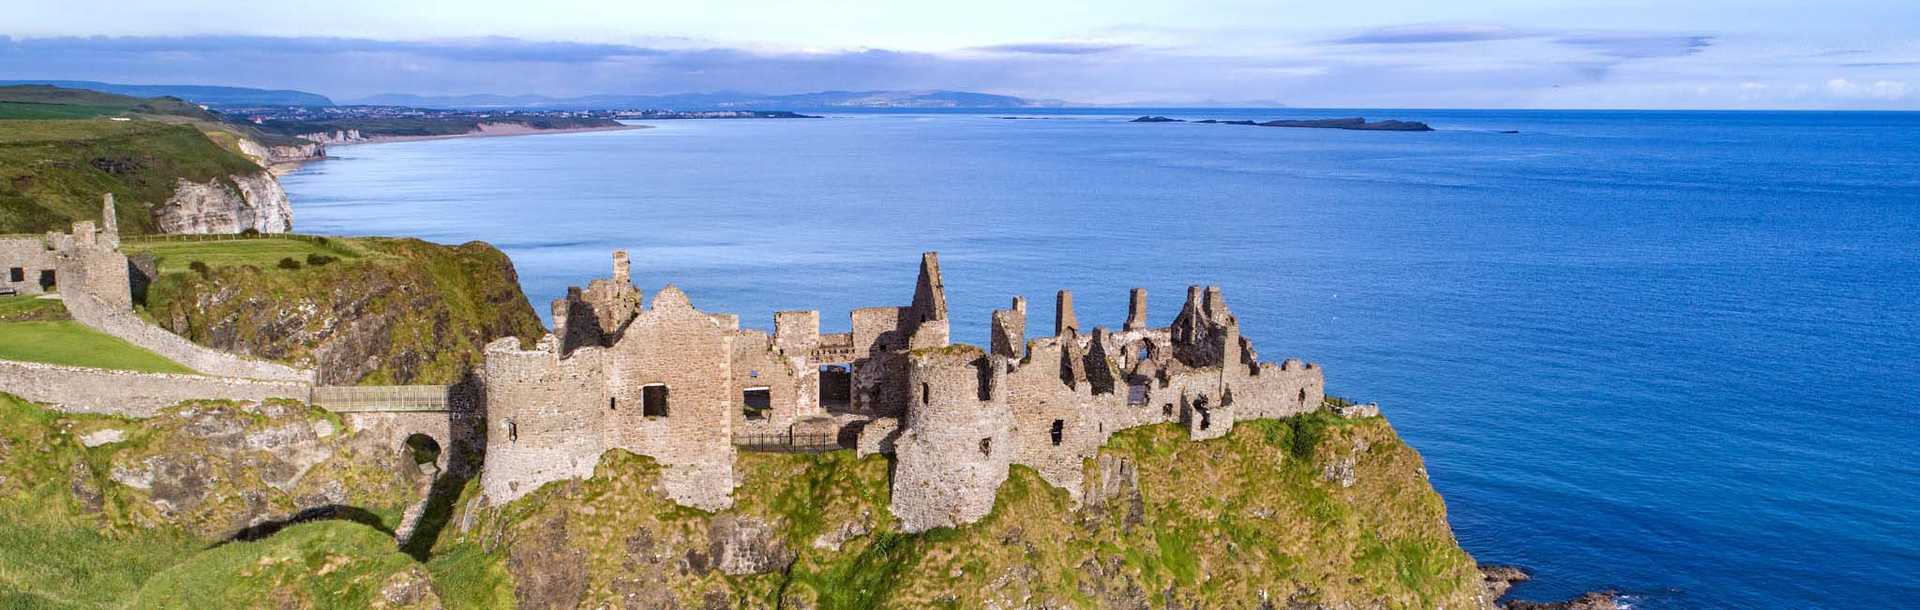 Ruins of Dunluce Castle on the coastal cliffs in County Antrim, Northern Ireland